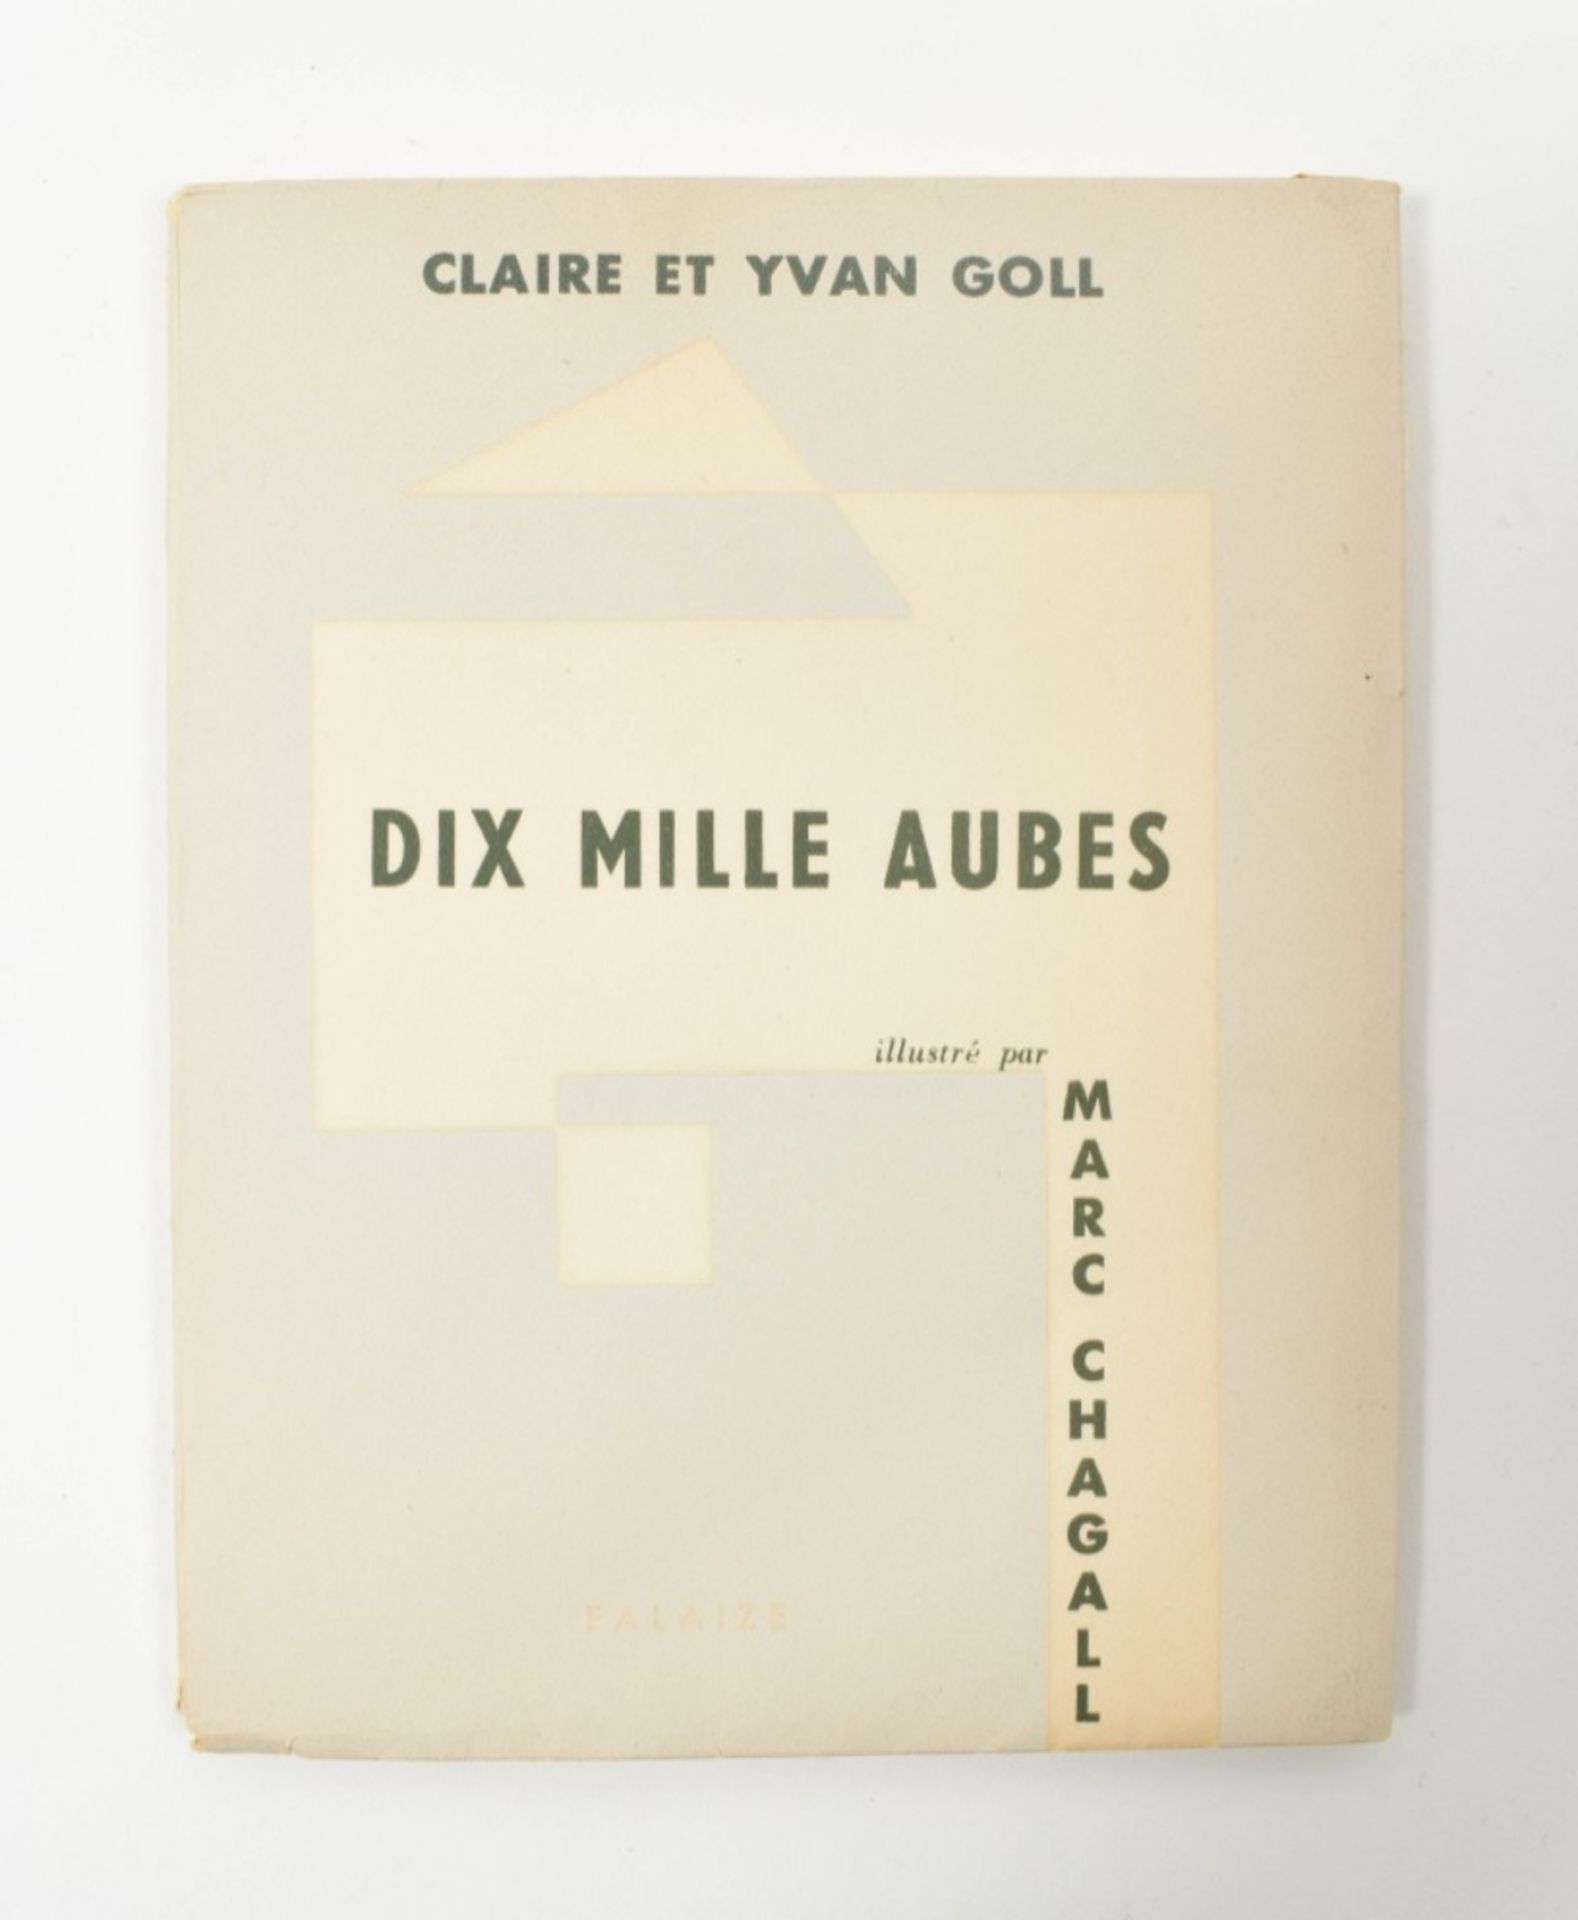 Yvan and Claire Goll. Dix mille aubes